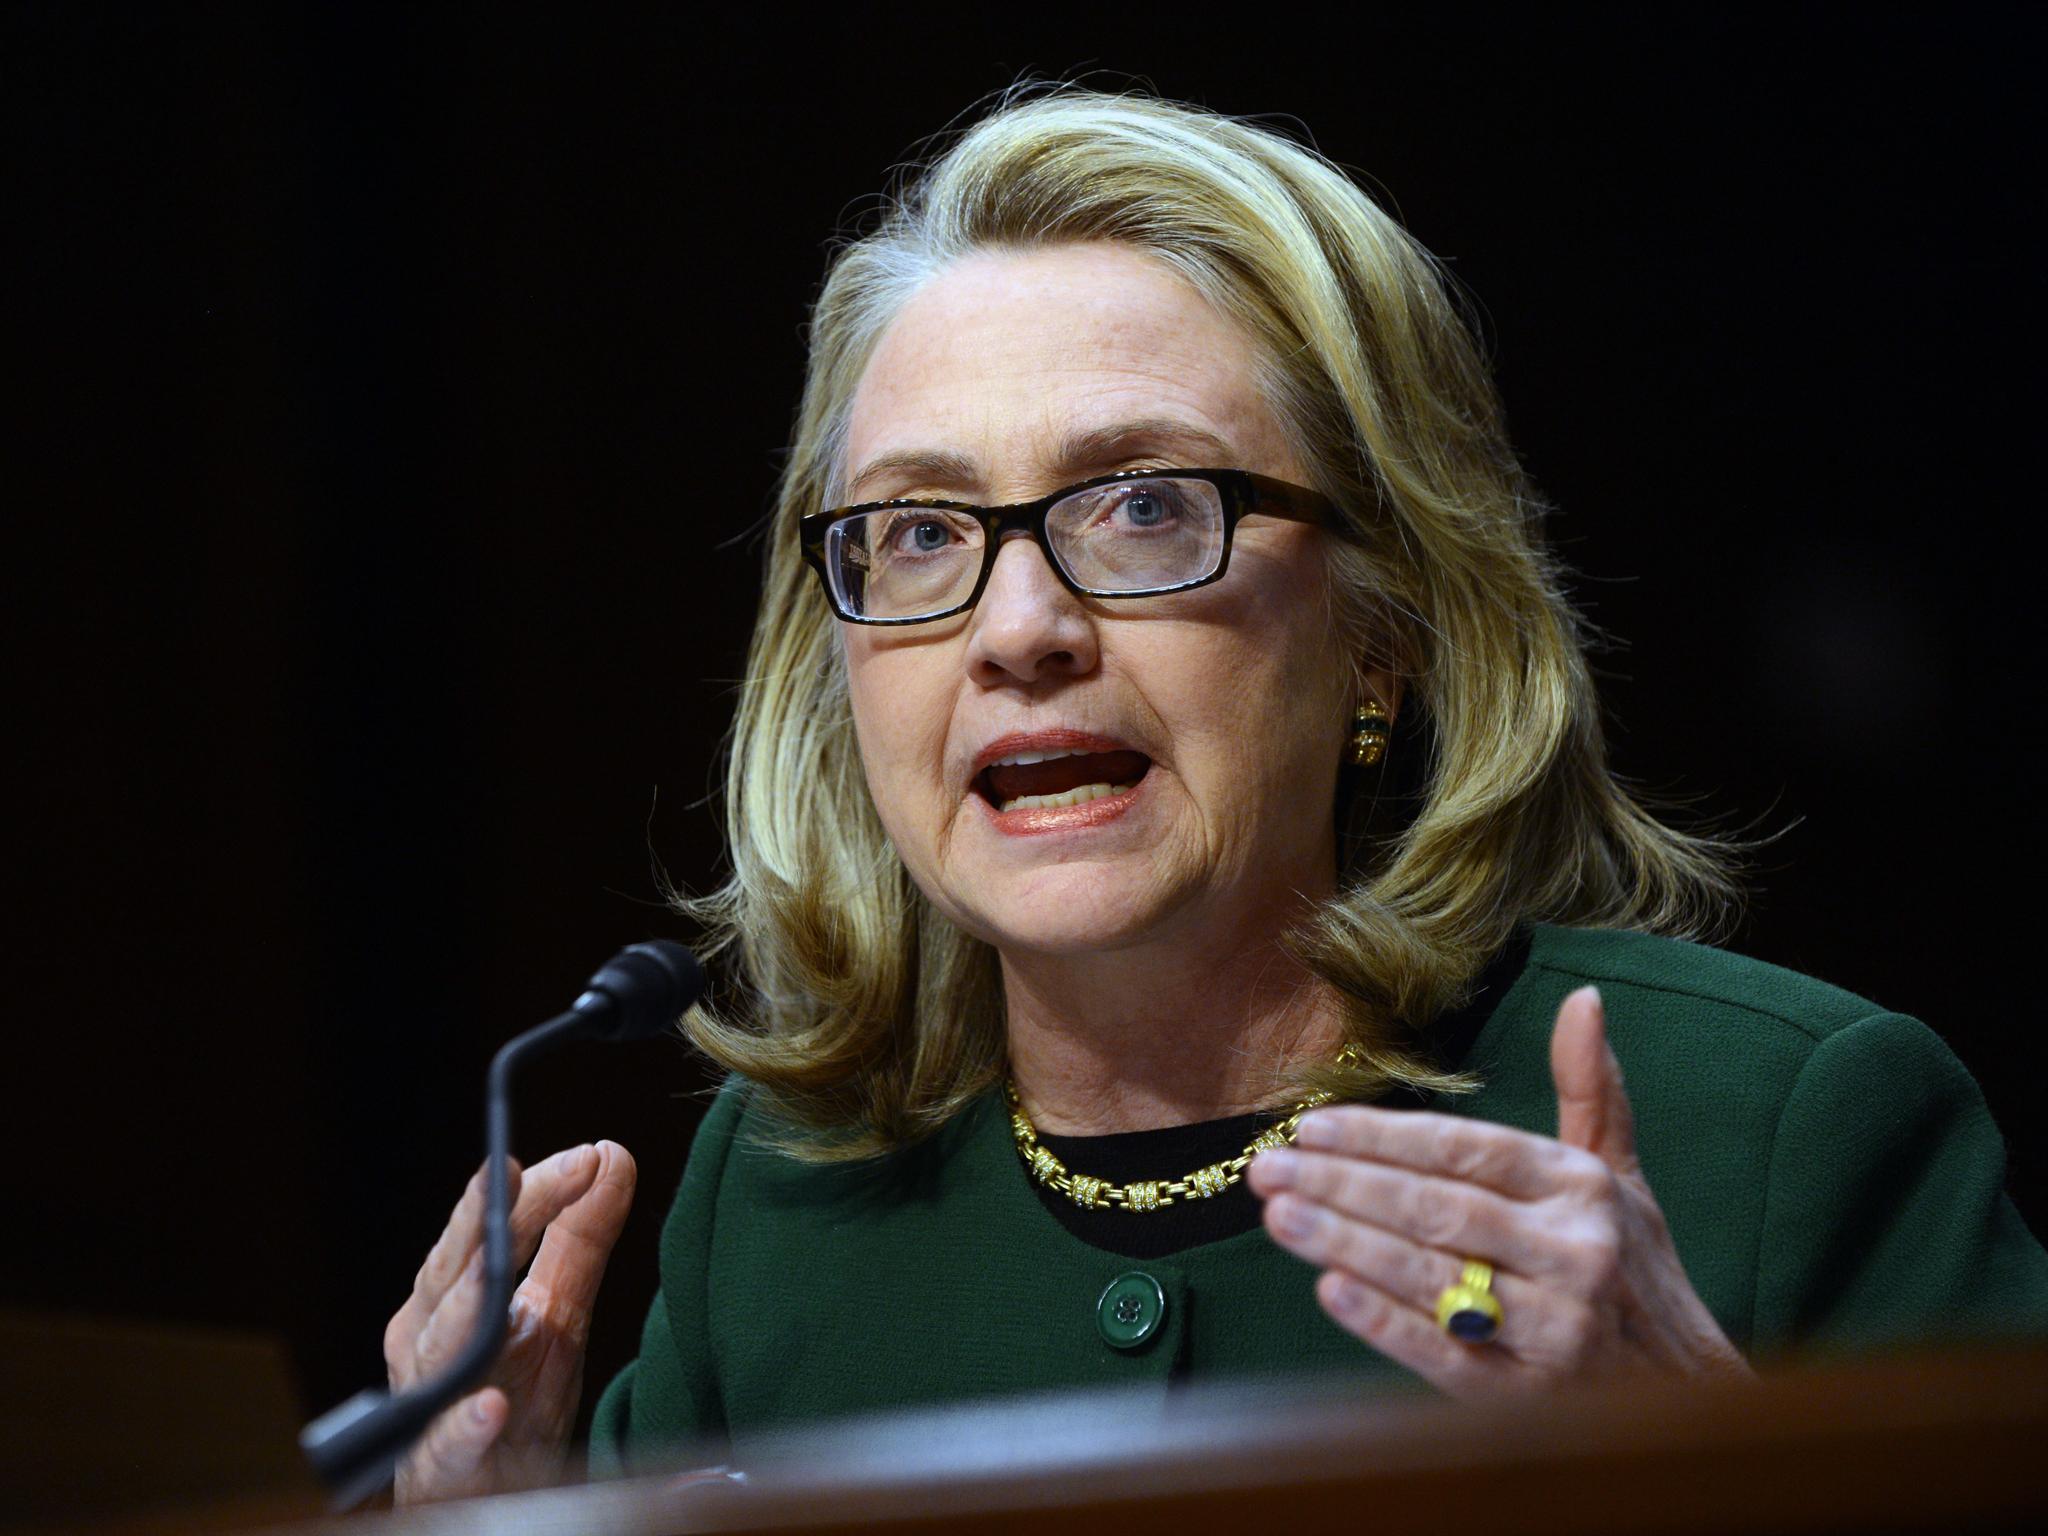 Clinton testifies to Senate Foreign Relations Committee in 2013 Saul Loeb/Getty